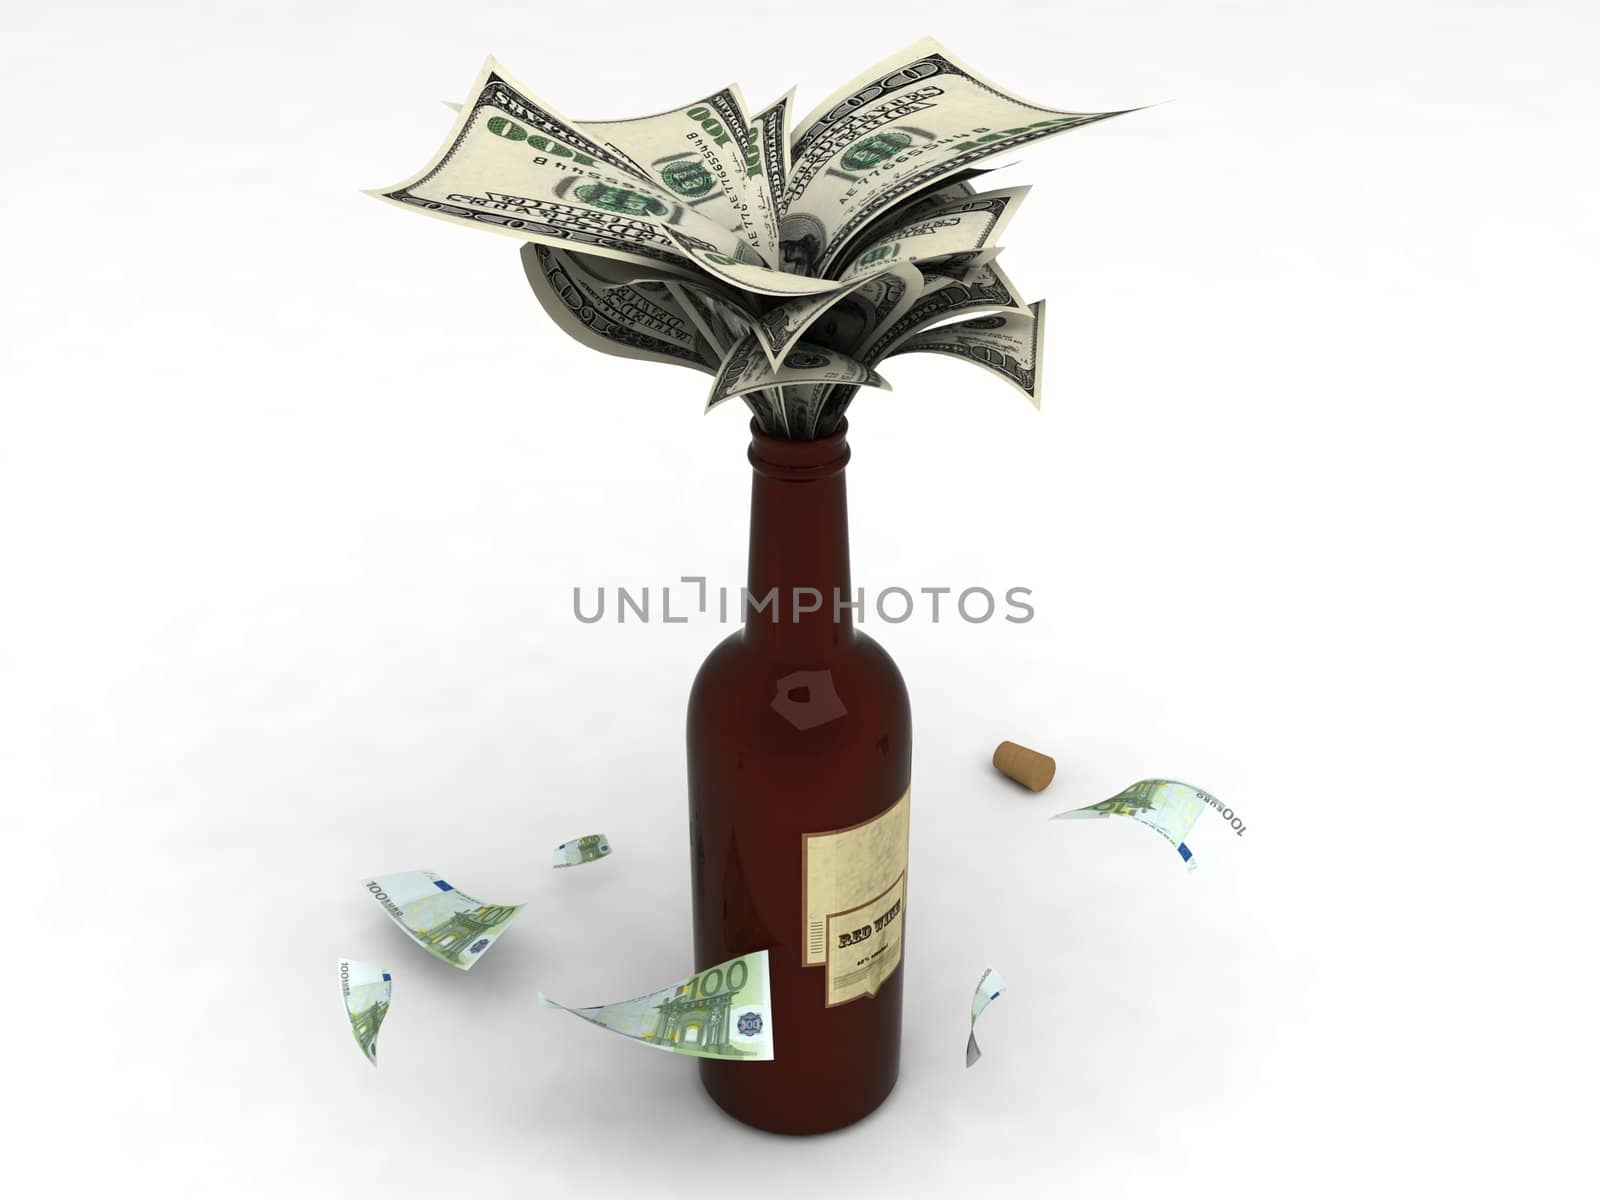 three dimensional view of money in a wine bottle on an isolated background
